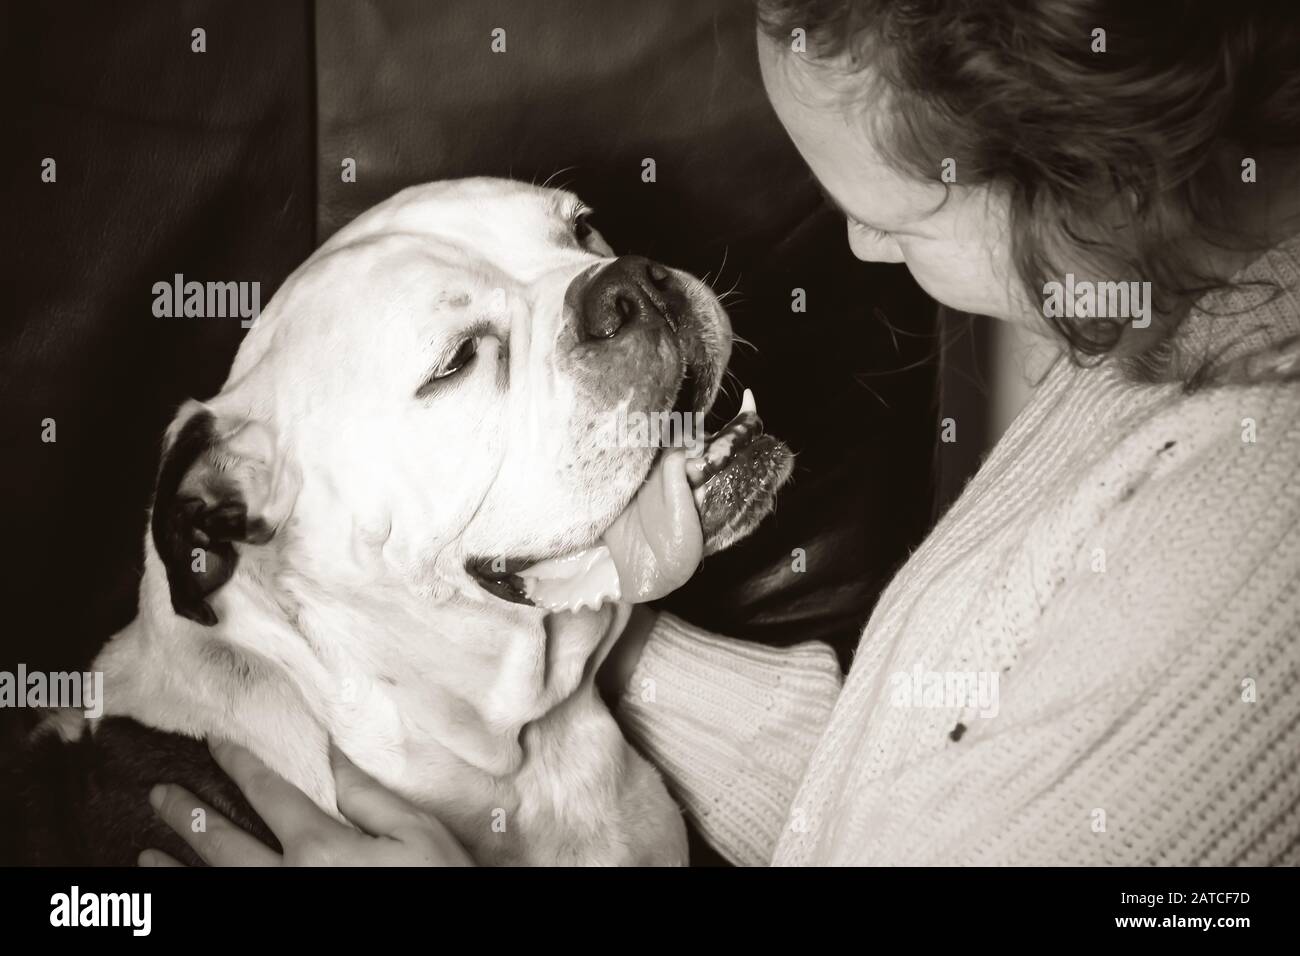 Girl holding Old English Bulldog, bulldog seems in love with the young woman. Stock Photo